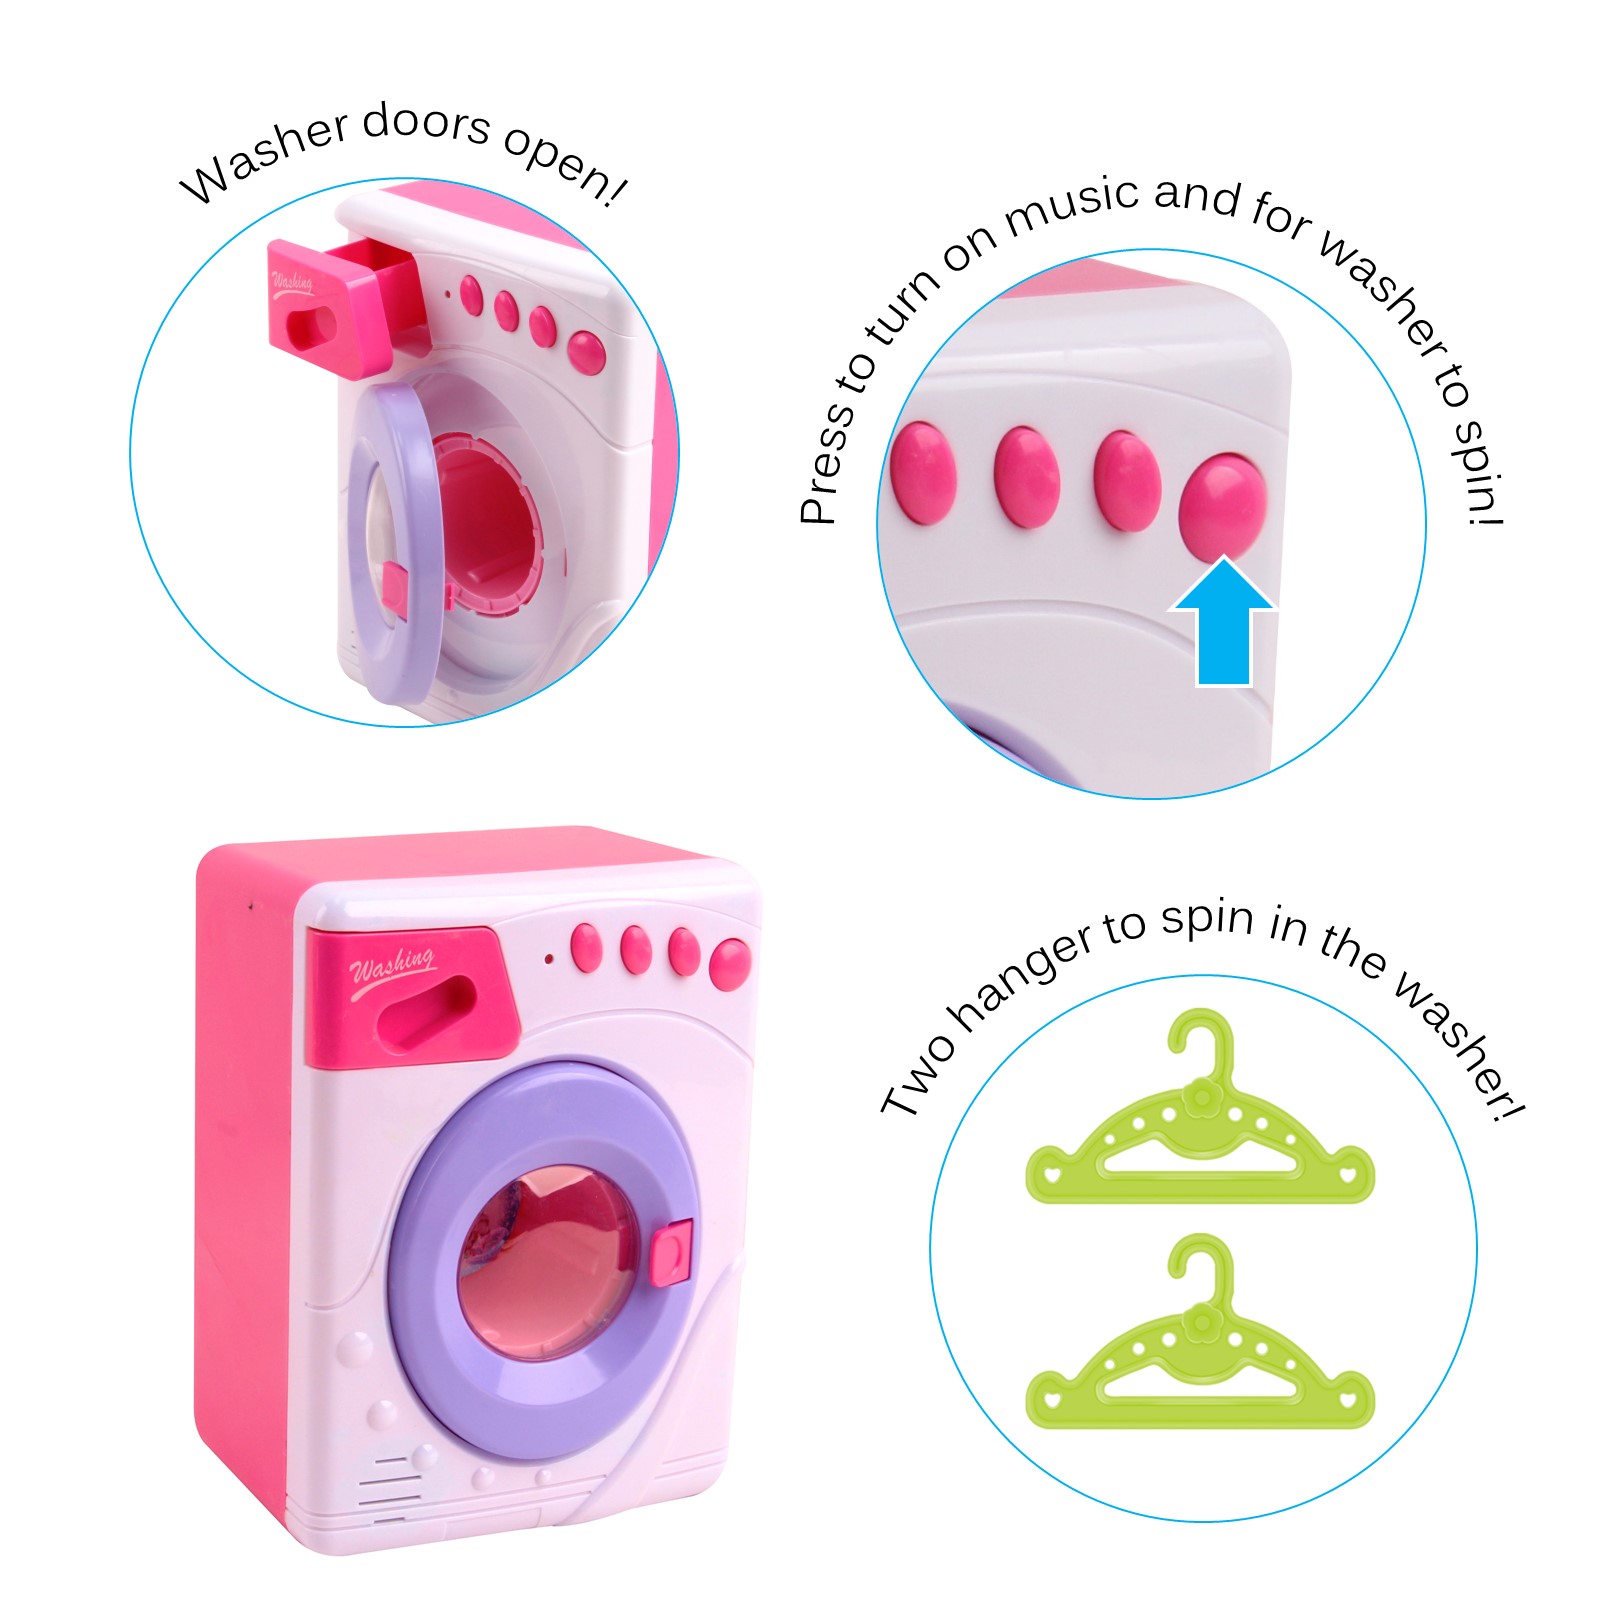 Vokodo Washer And Flatiron Playset With Lights And Music Includes Two Hangers Functional Iron Spray Pretend Play Washing Machine Early Learning Kids Preschool Toy Great Gift For Children Girls Toddler TK-20